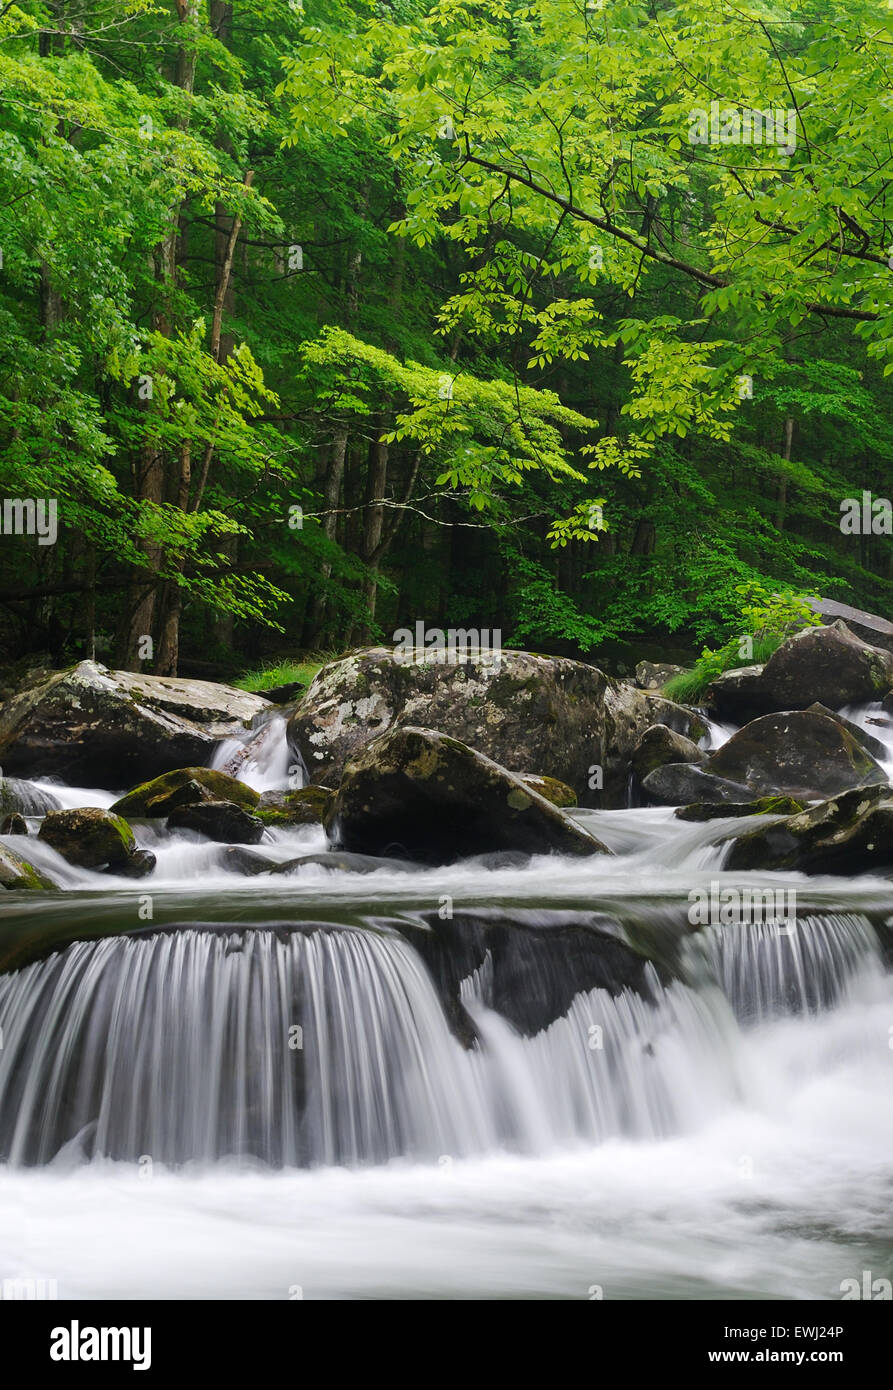 Large Cascade in the middle prong of the Little Pigeon River in Tremont of Great Smoky Mountains National Park, Tennessee, USA Stock Photo